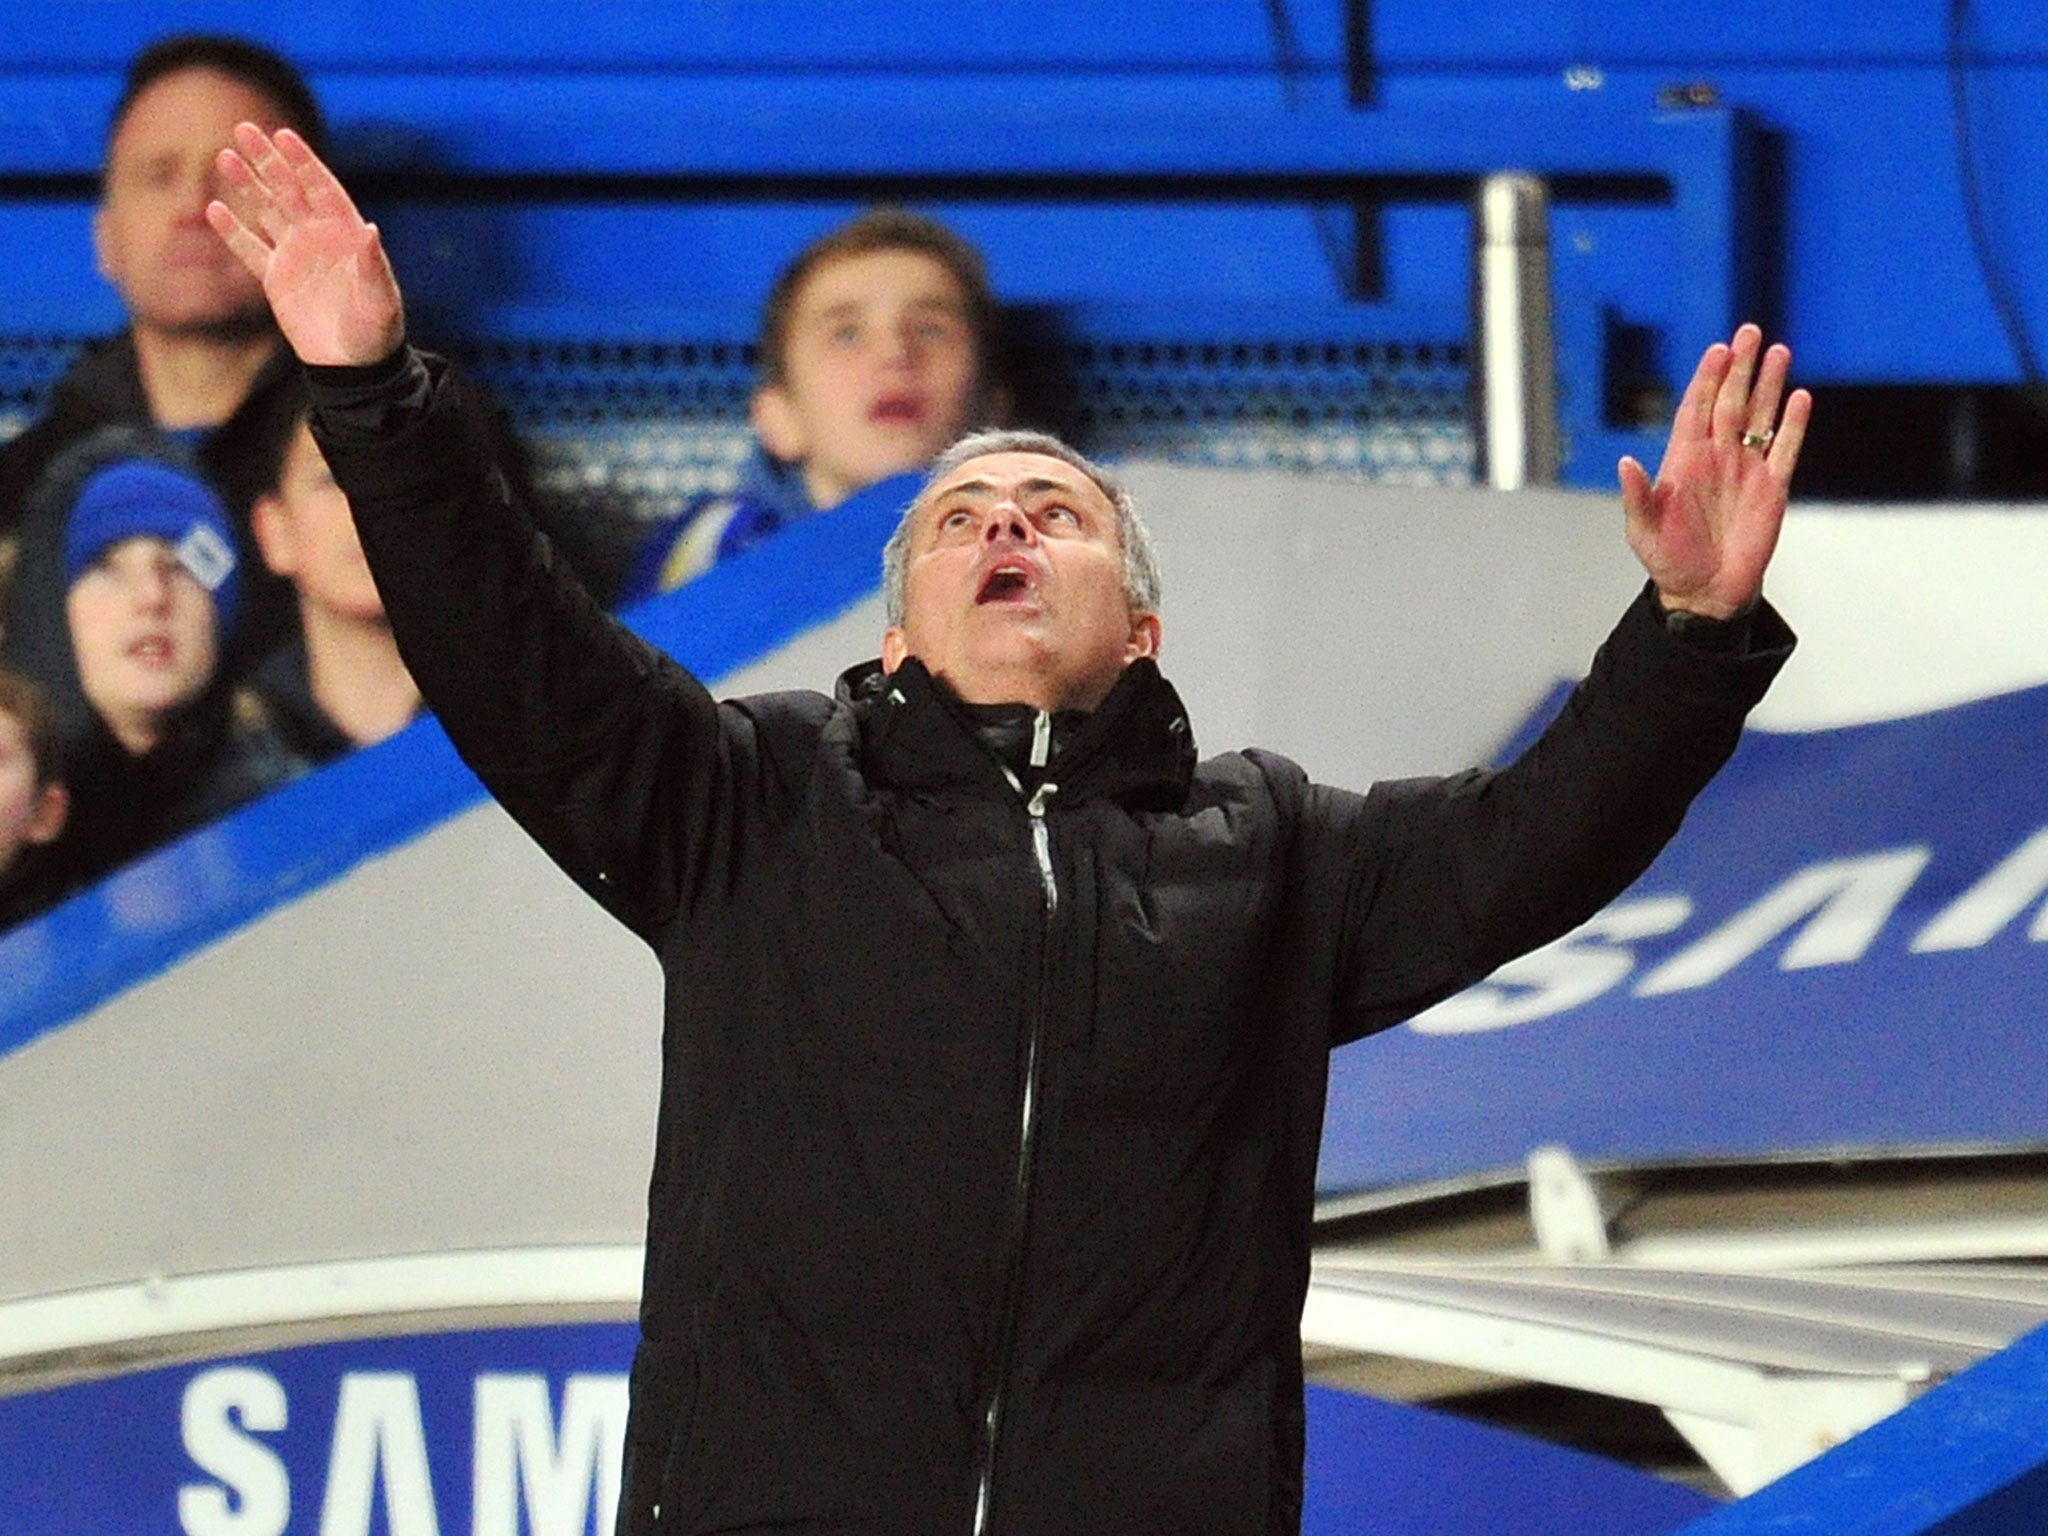 Jose Mourinho gestures during the FA Cup match between Chelsea and Stoke